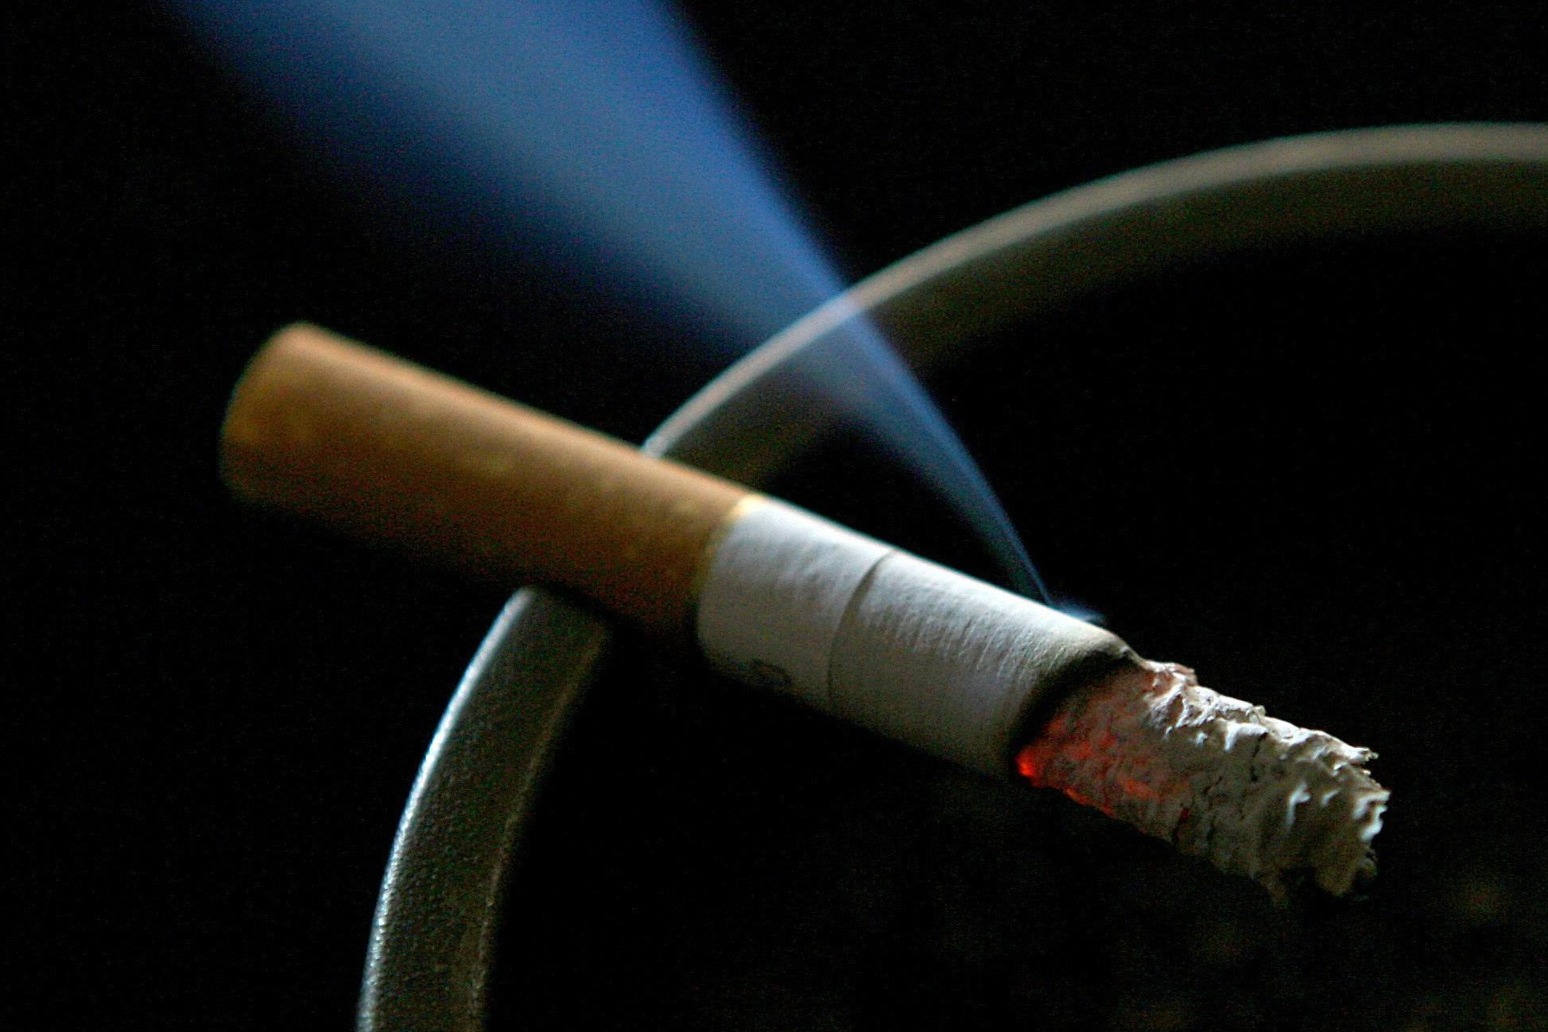 England unlikely to hit smoke-free target – report 